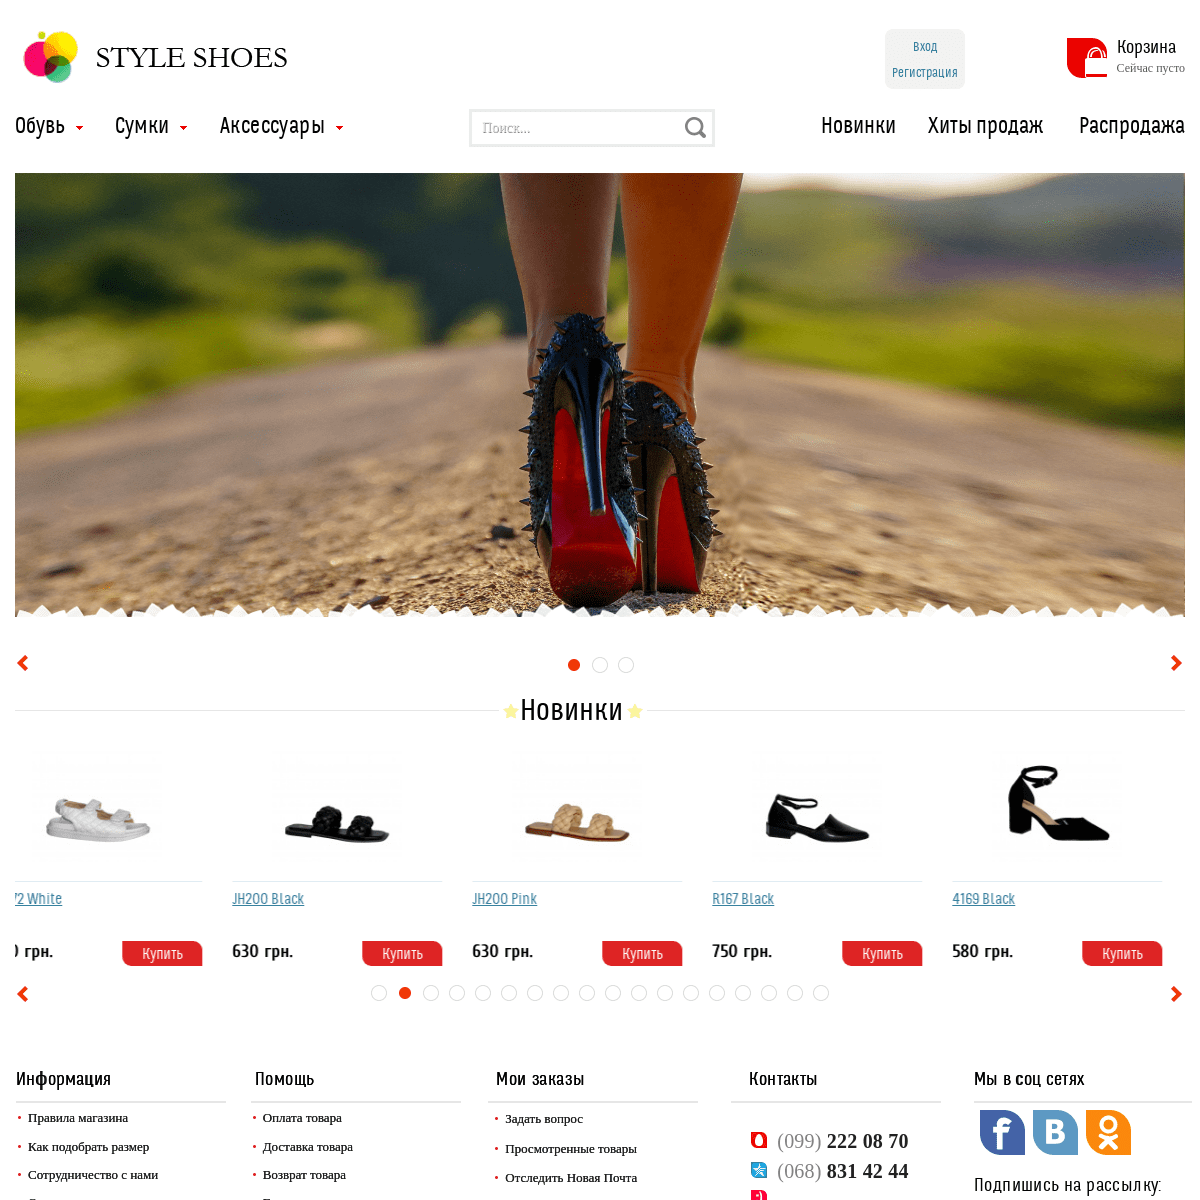 A complete backup of https://styleshoes.com.ua